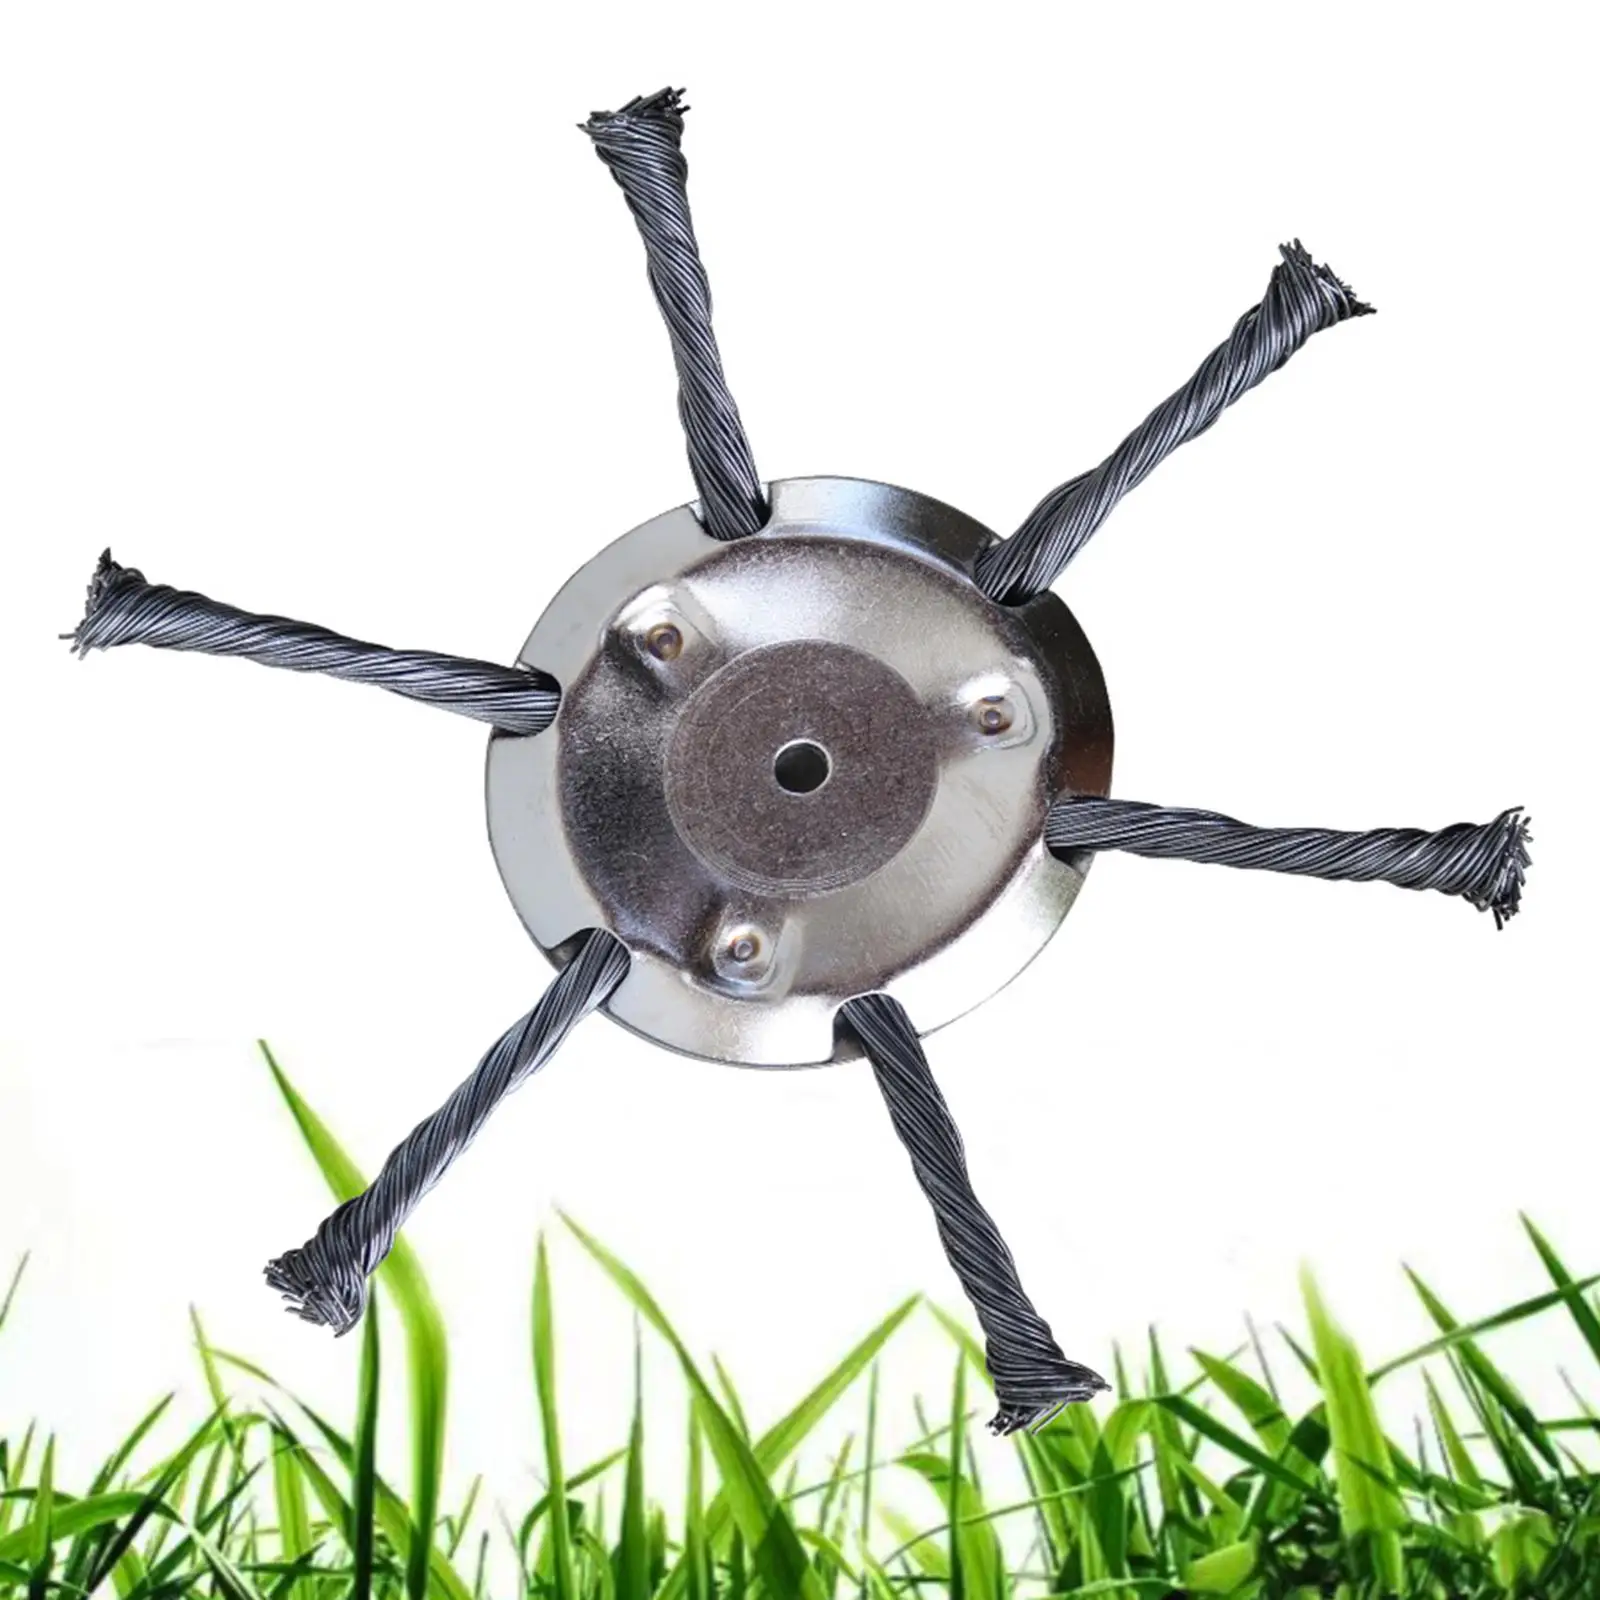 Stainless Steel Chain Trimmer Head Weed Eater Head Trimmer Head Replacement for Mower Tool Accessories Outside Garden Lawn Grass